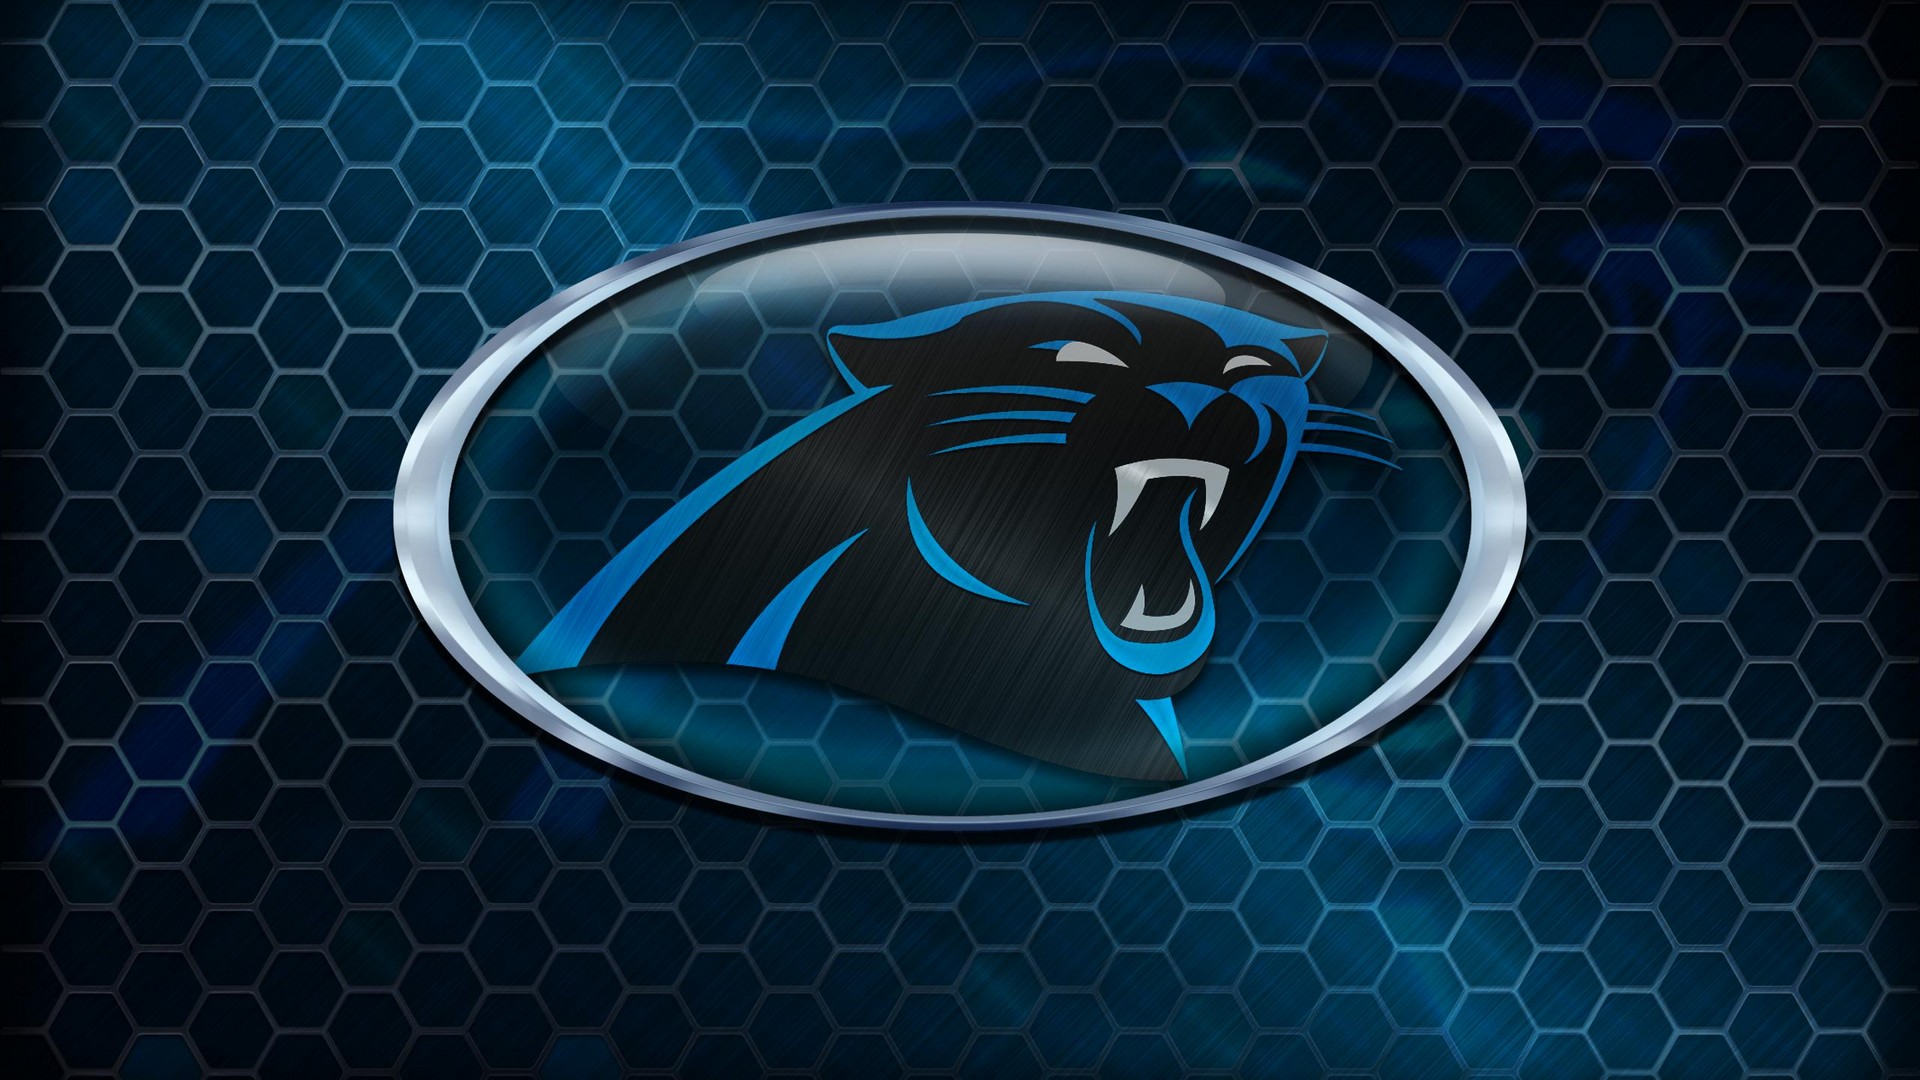 HD Panthers Backgrounds With high-resolution 1920X1080 pixel. You can use this wallpaper for your Mac or Windows Desktop Background, iPhone, Android or Tablet and another Smartphone device